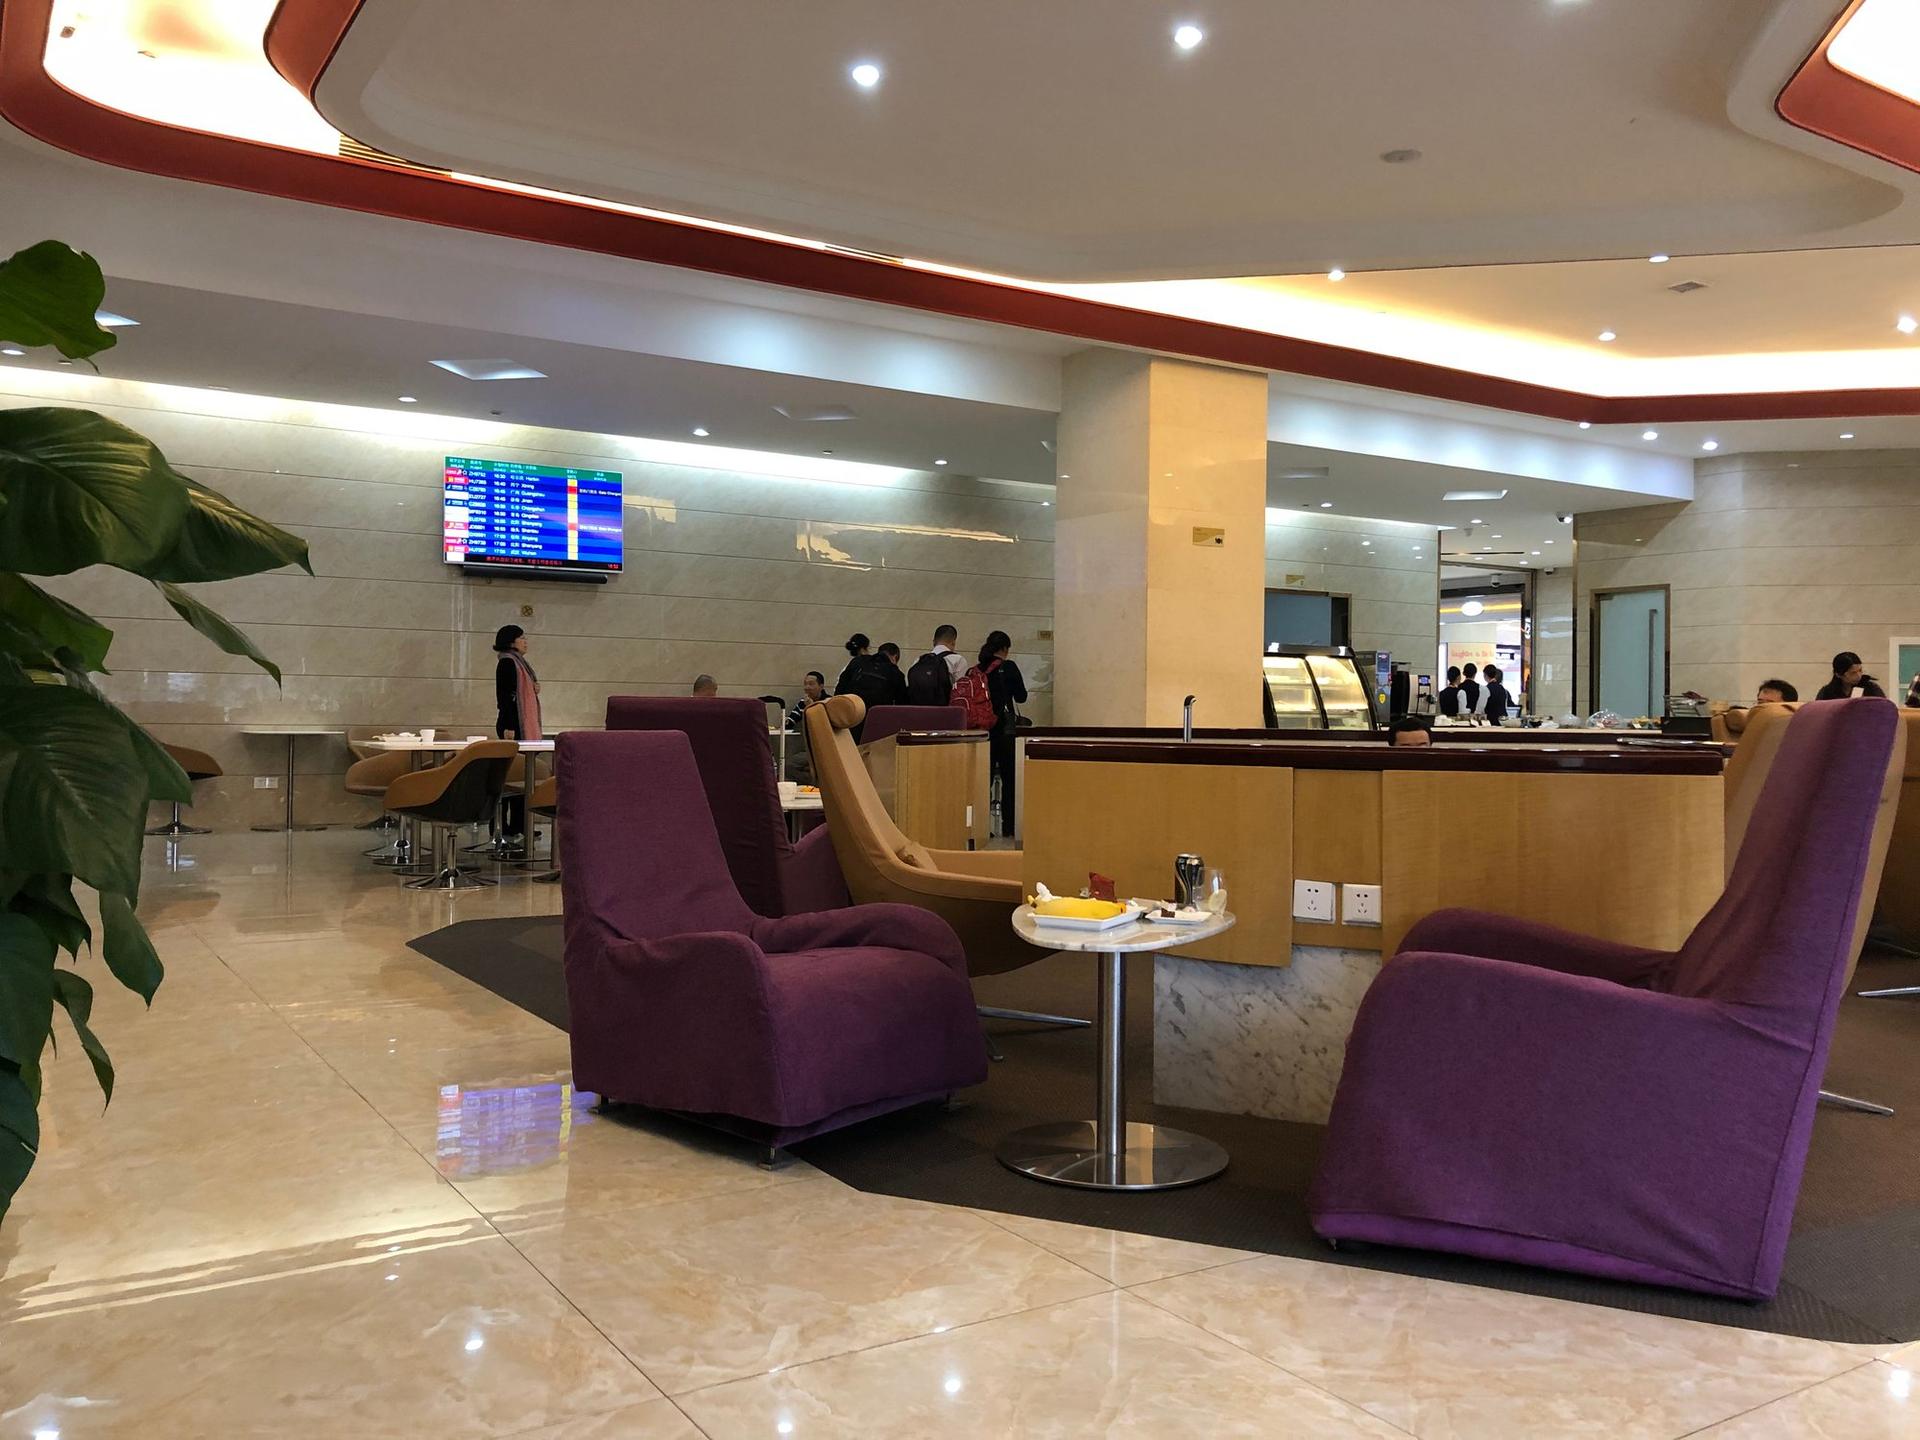 Hainan Airlines Lounge image 1 of 2